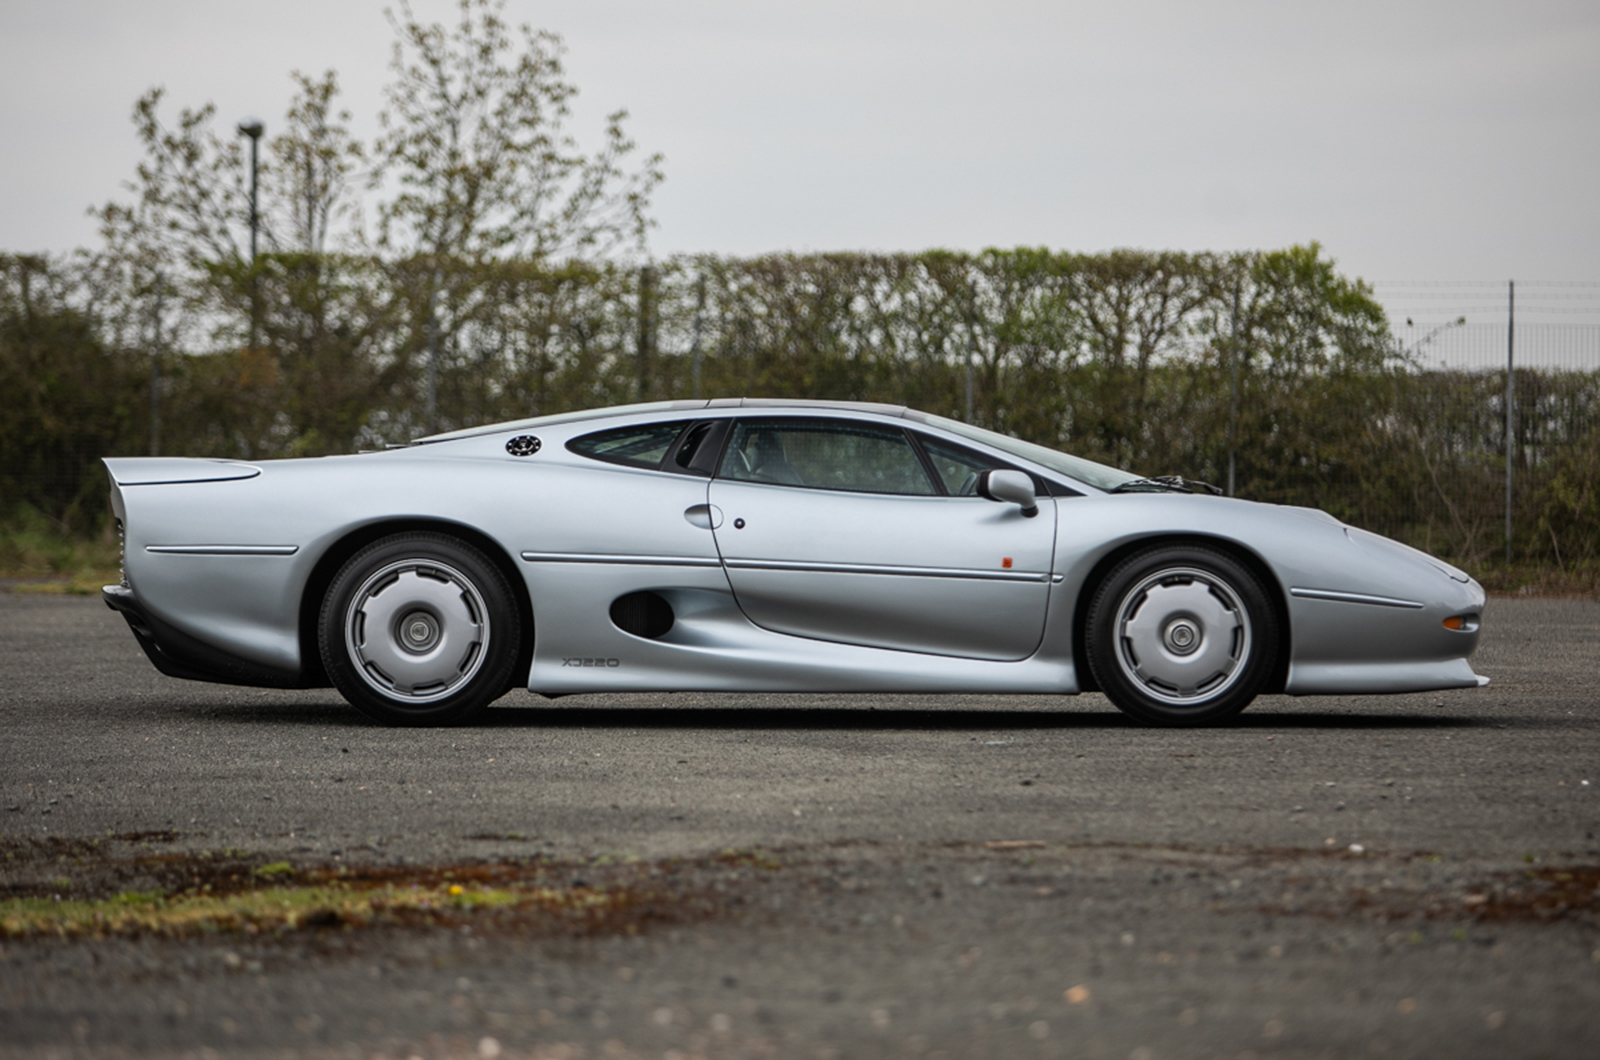 Classic & Sports Car – When did you last see two Jaguar XJ220s in one auction?